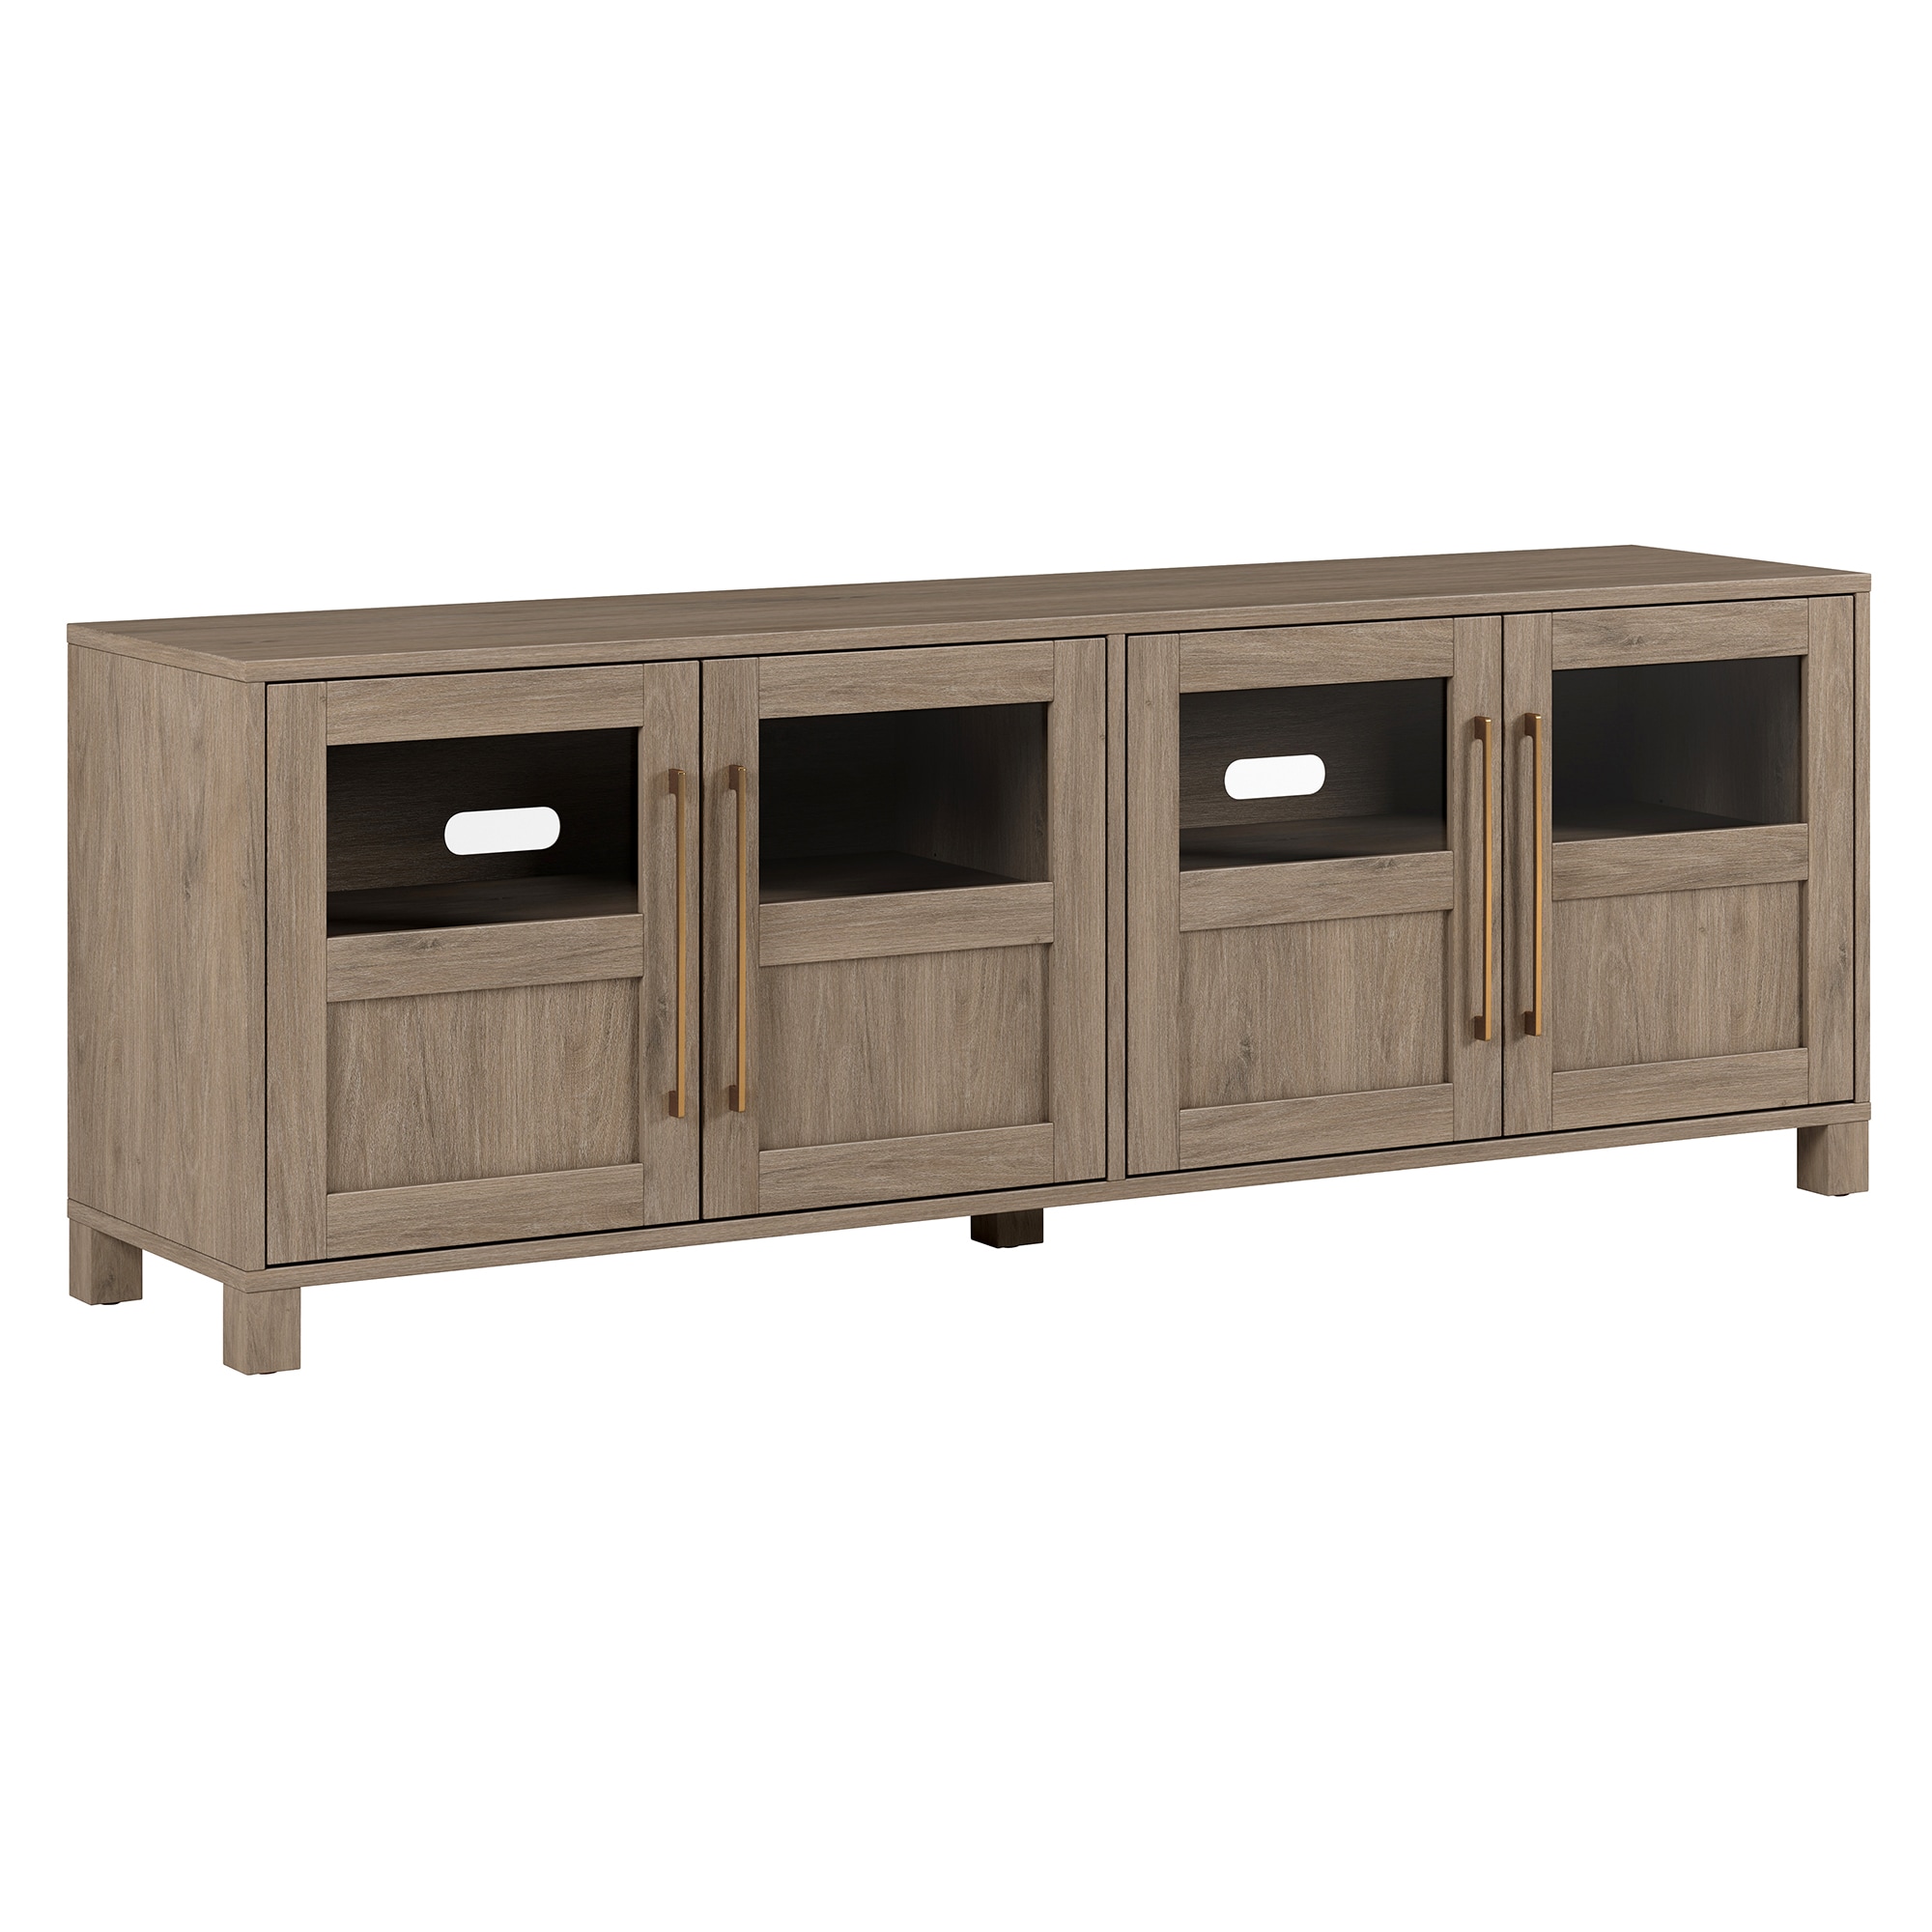 Hailey Home Holbrook Transitional Antiqued Gray Oak Tv Stand ...